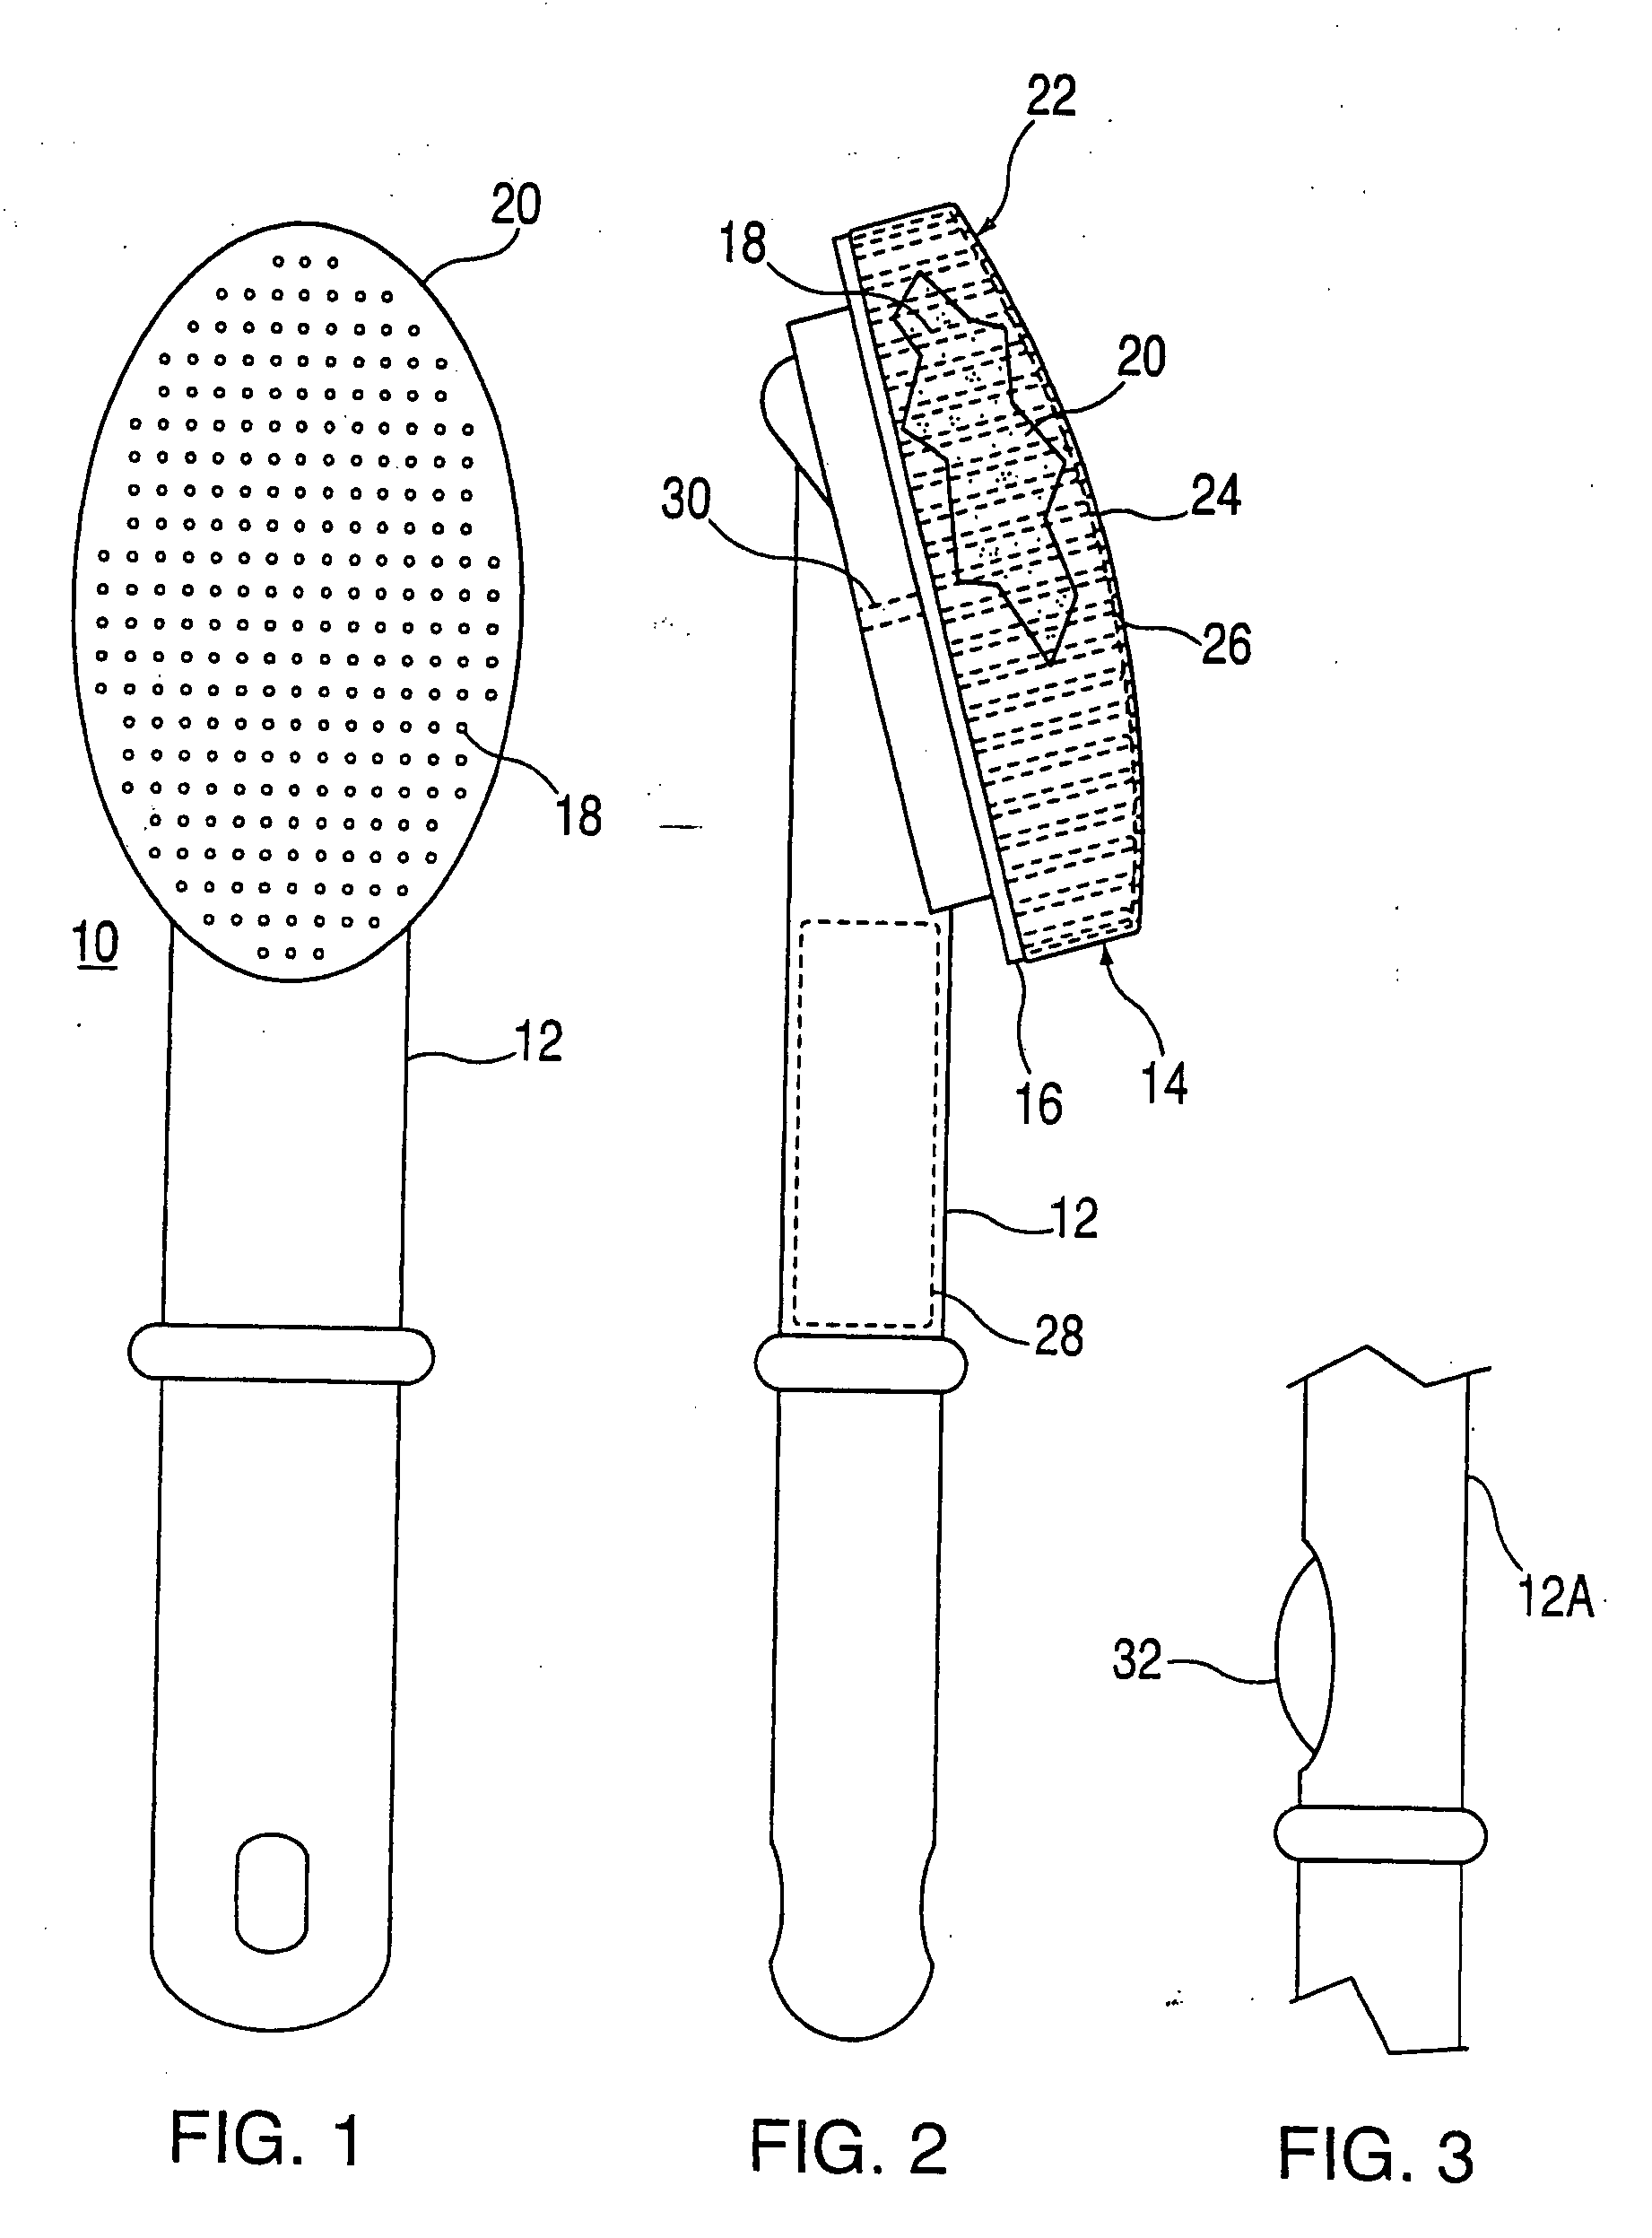 Self-cleaning brush with a flexible matrix